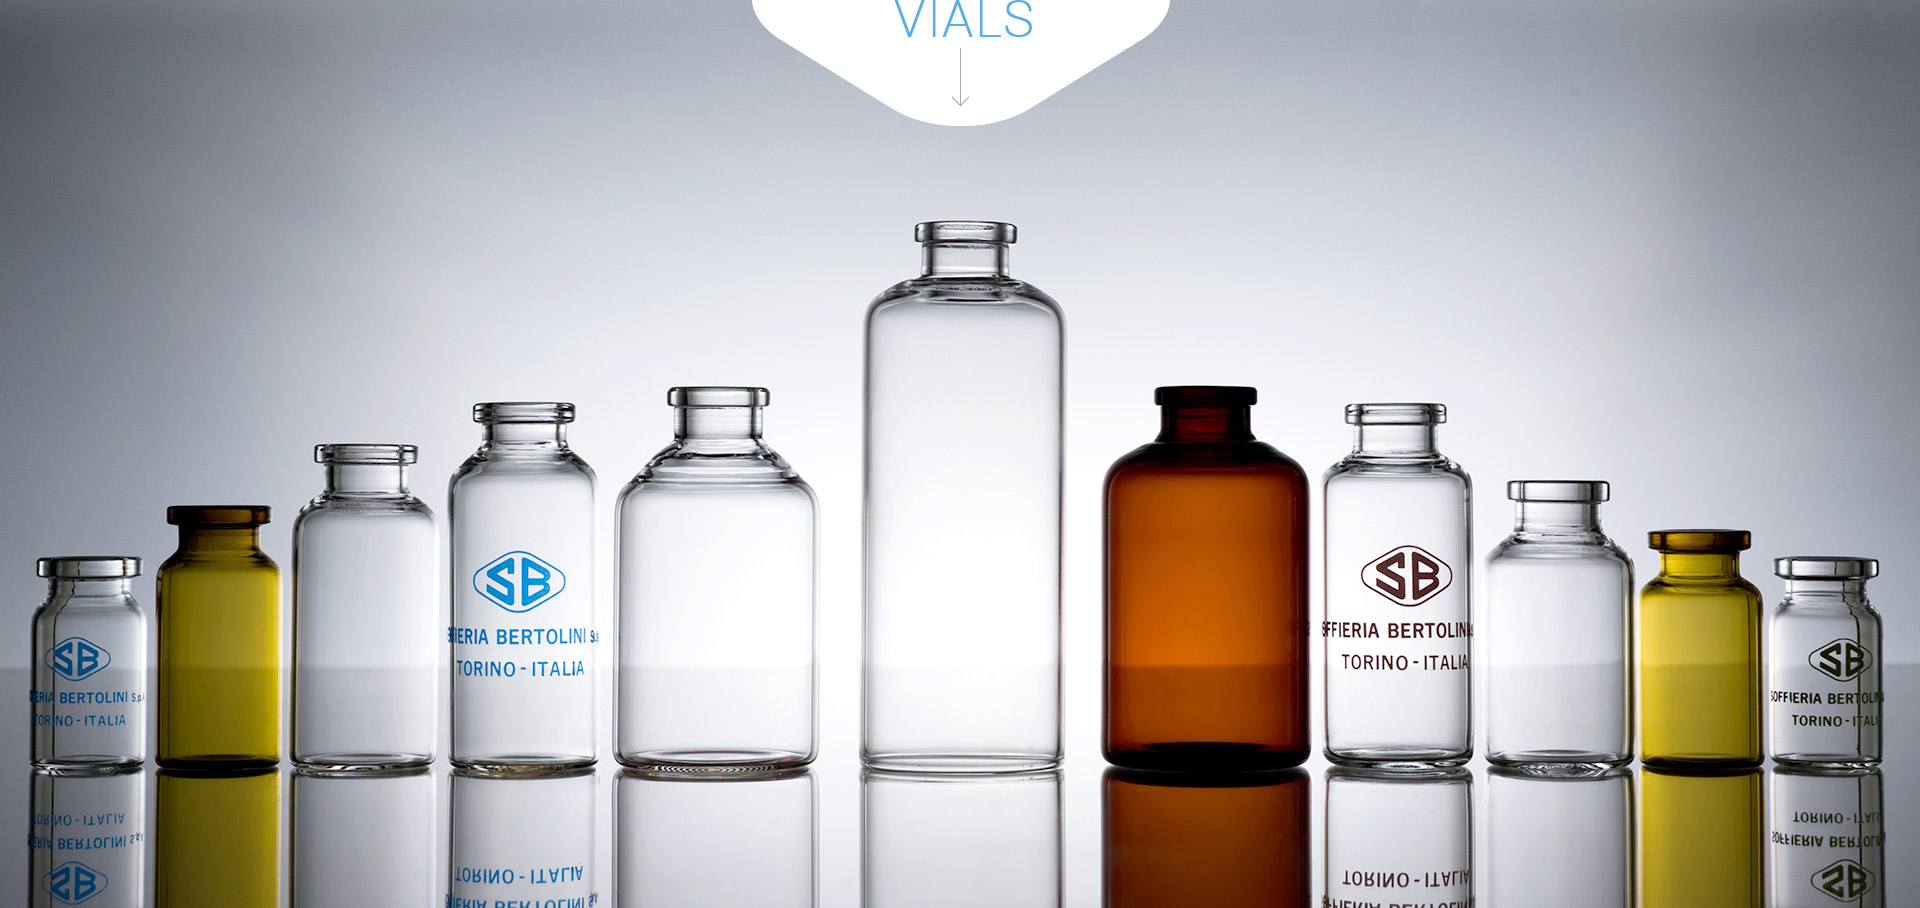 Soffieria Bertolini manufacture vials for the pharmaceutical industry